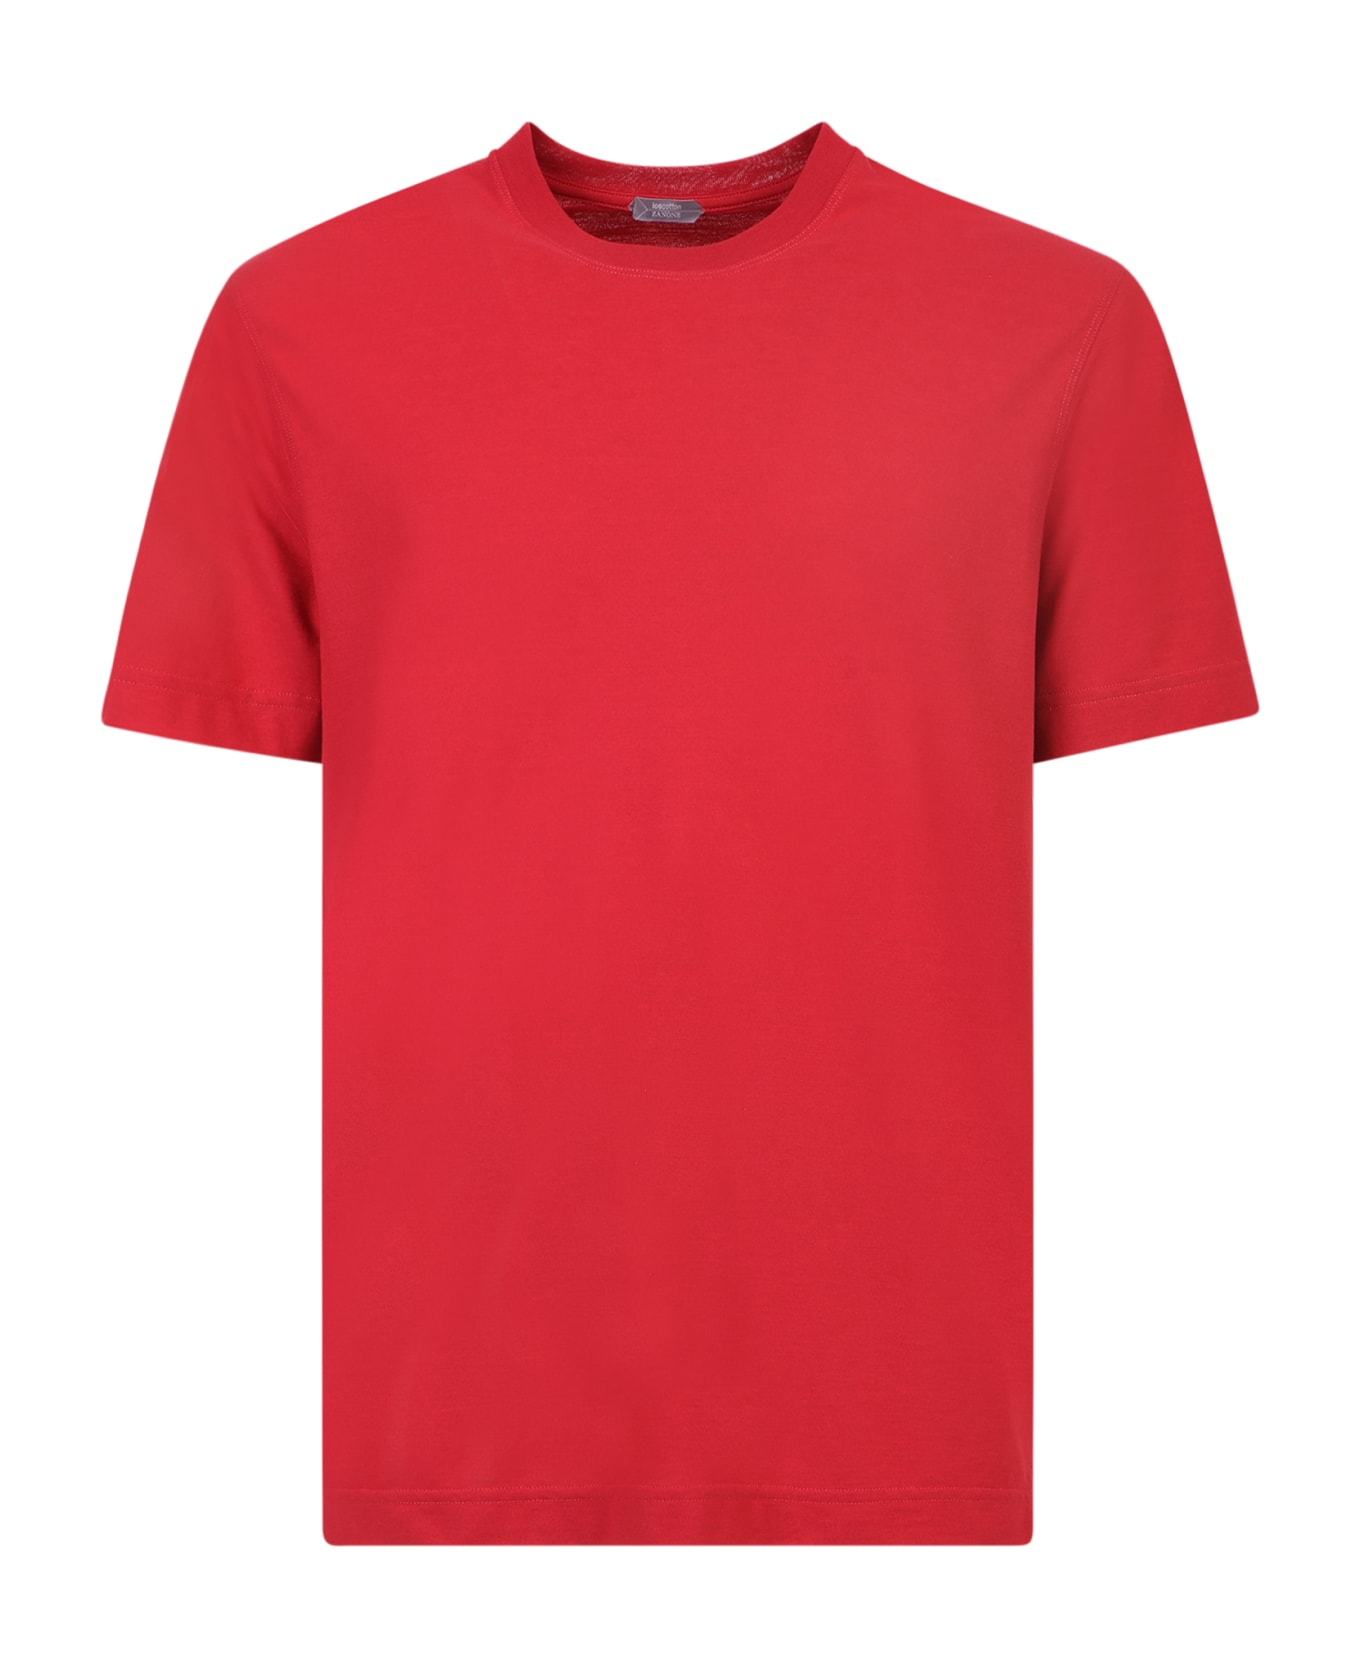 Zanone Rollneck T-shirt - Red